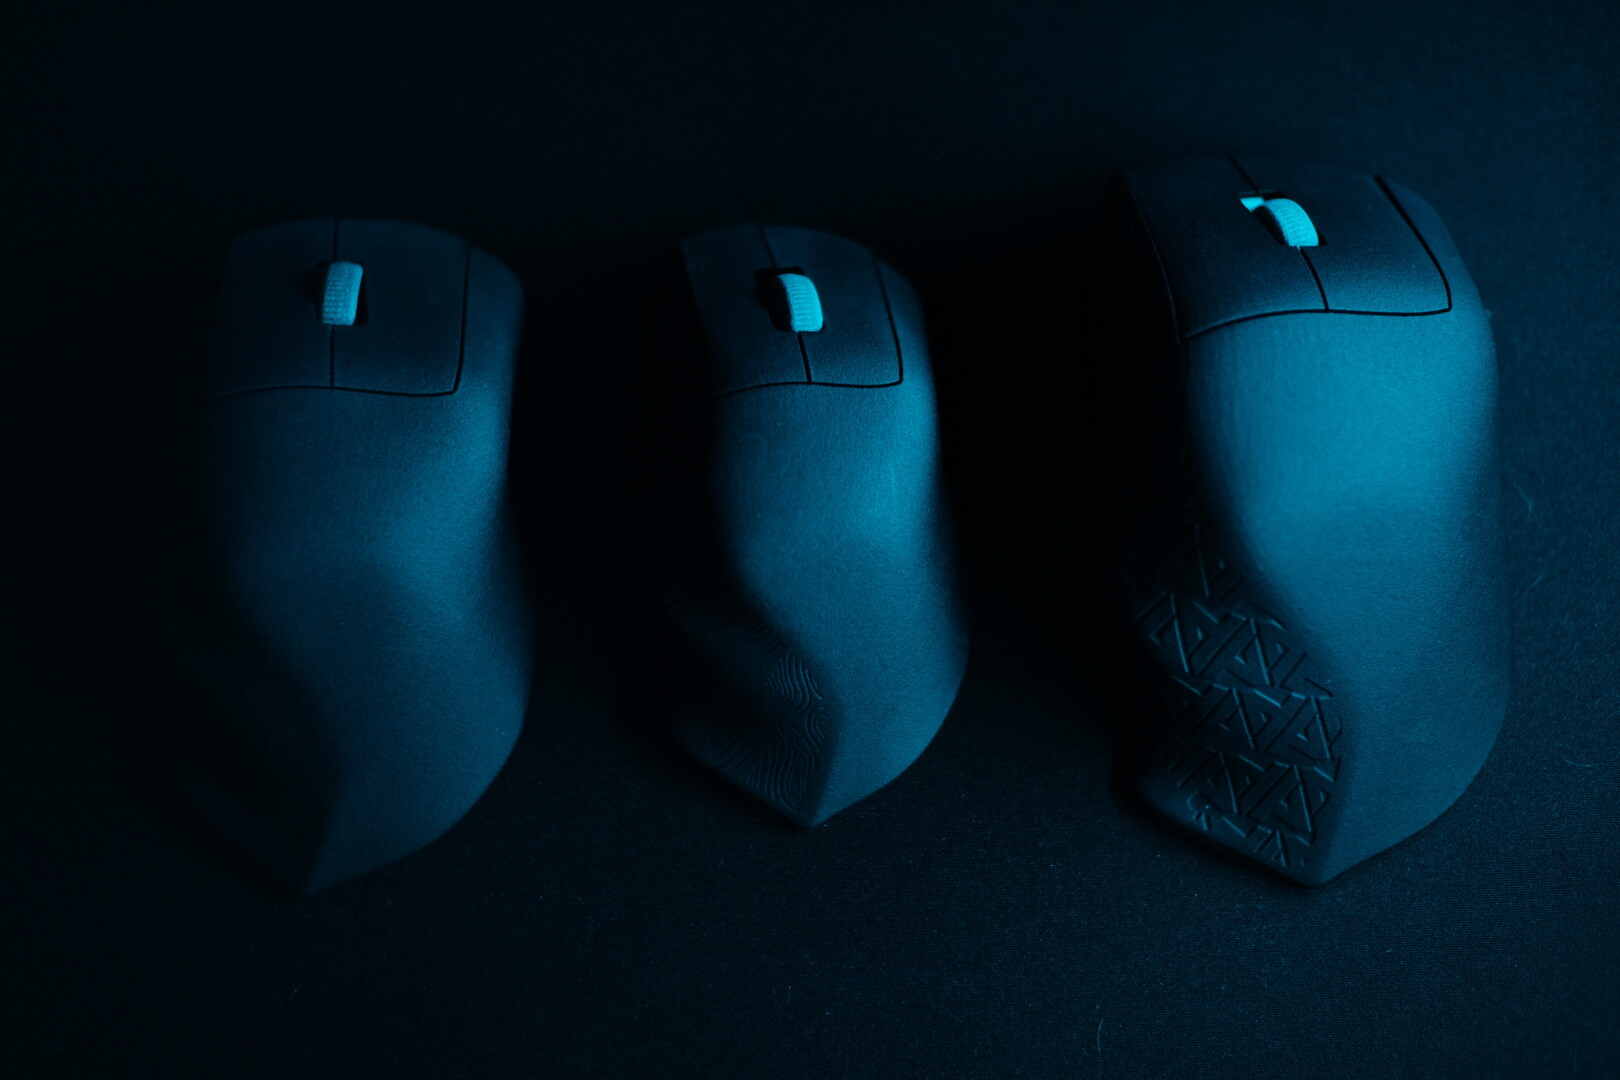 Introducing Formify Custom-design Gaming Mice Tailored to Your Hand - returnal